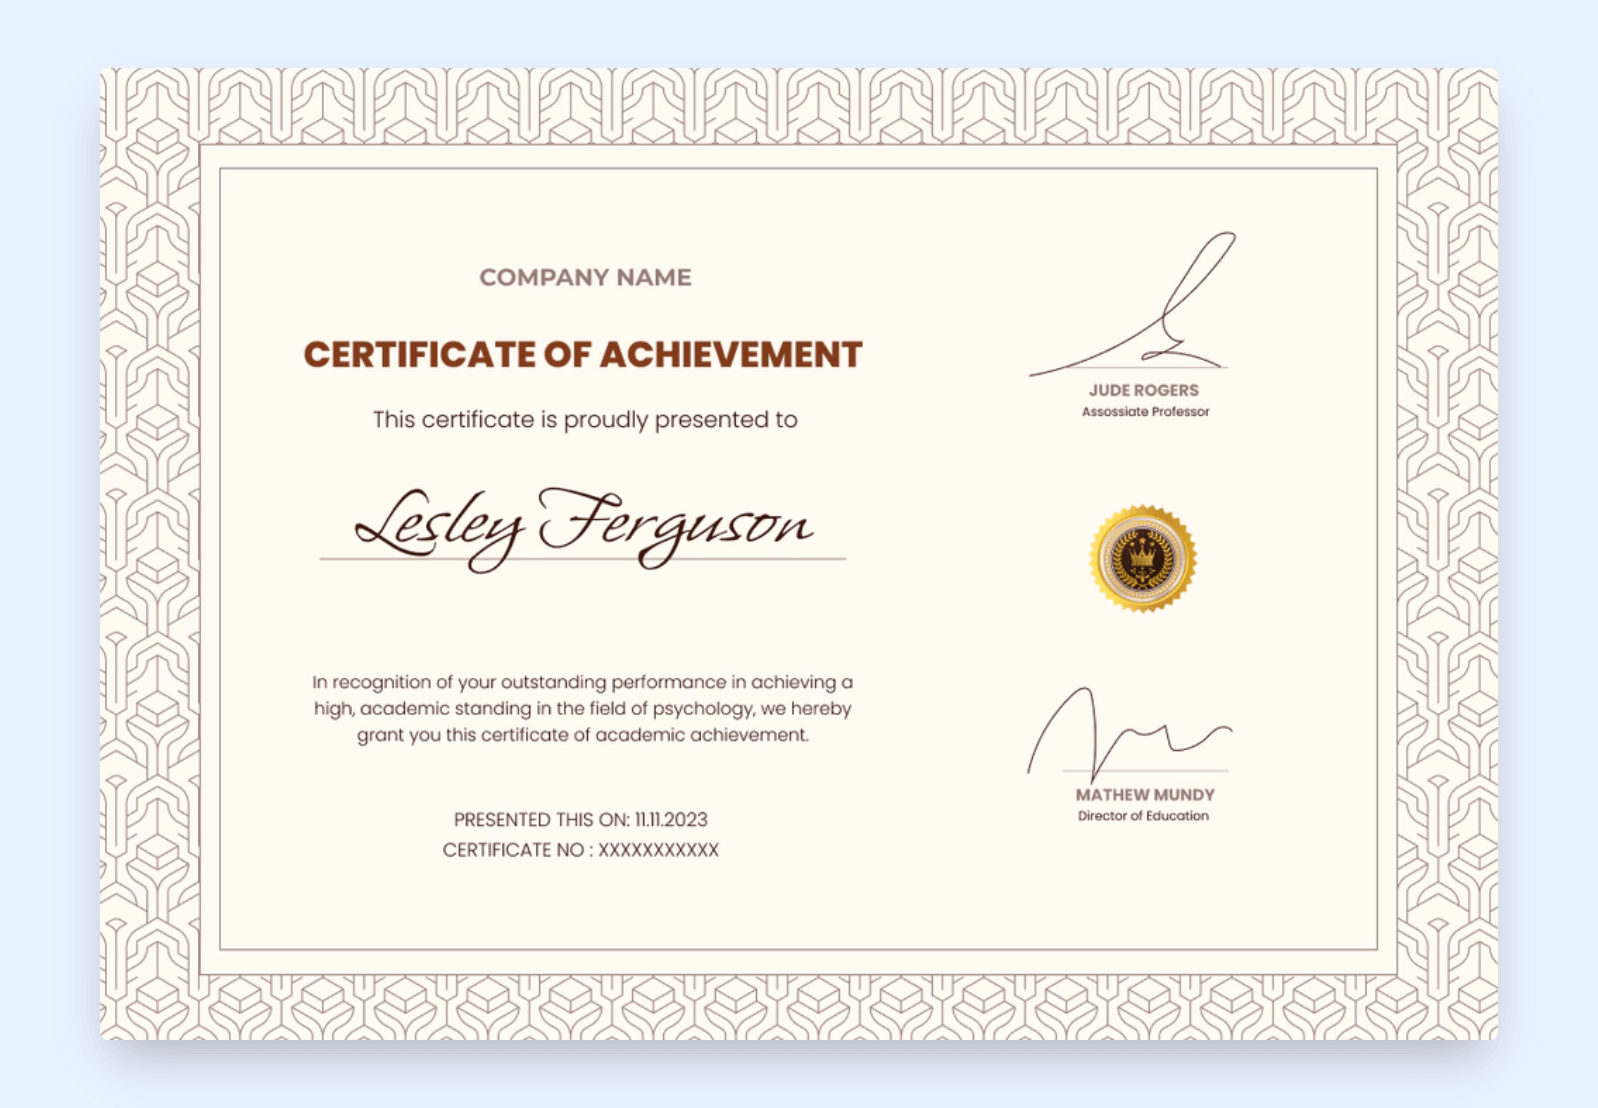 Google Slides golden certificate template free to download.